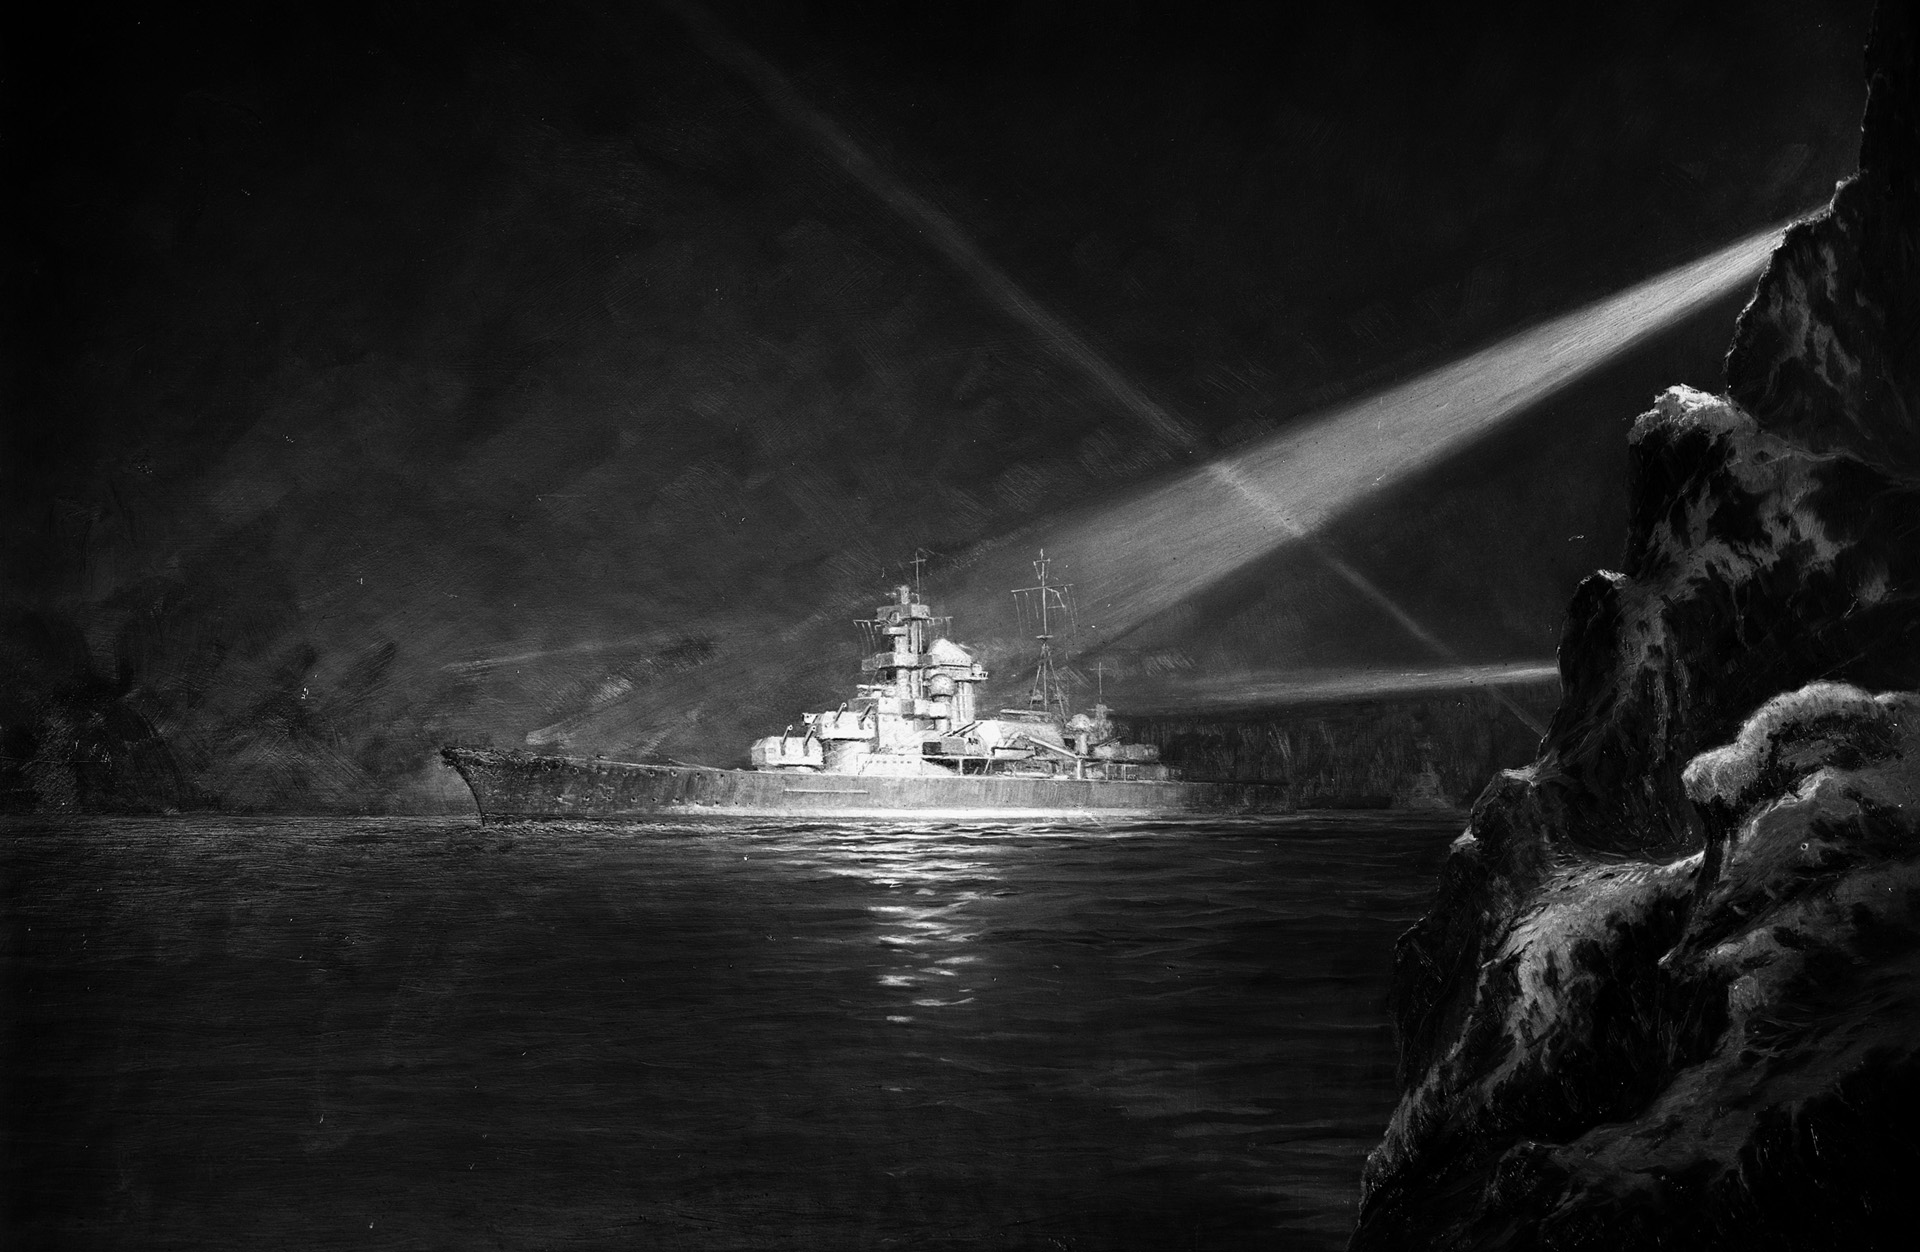 The Blücher is illuminated by Norwegian searchlights as coastal batteries prepare to unleash devastating fire on the enemy warship on April 9, 1940.